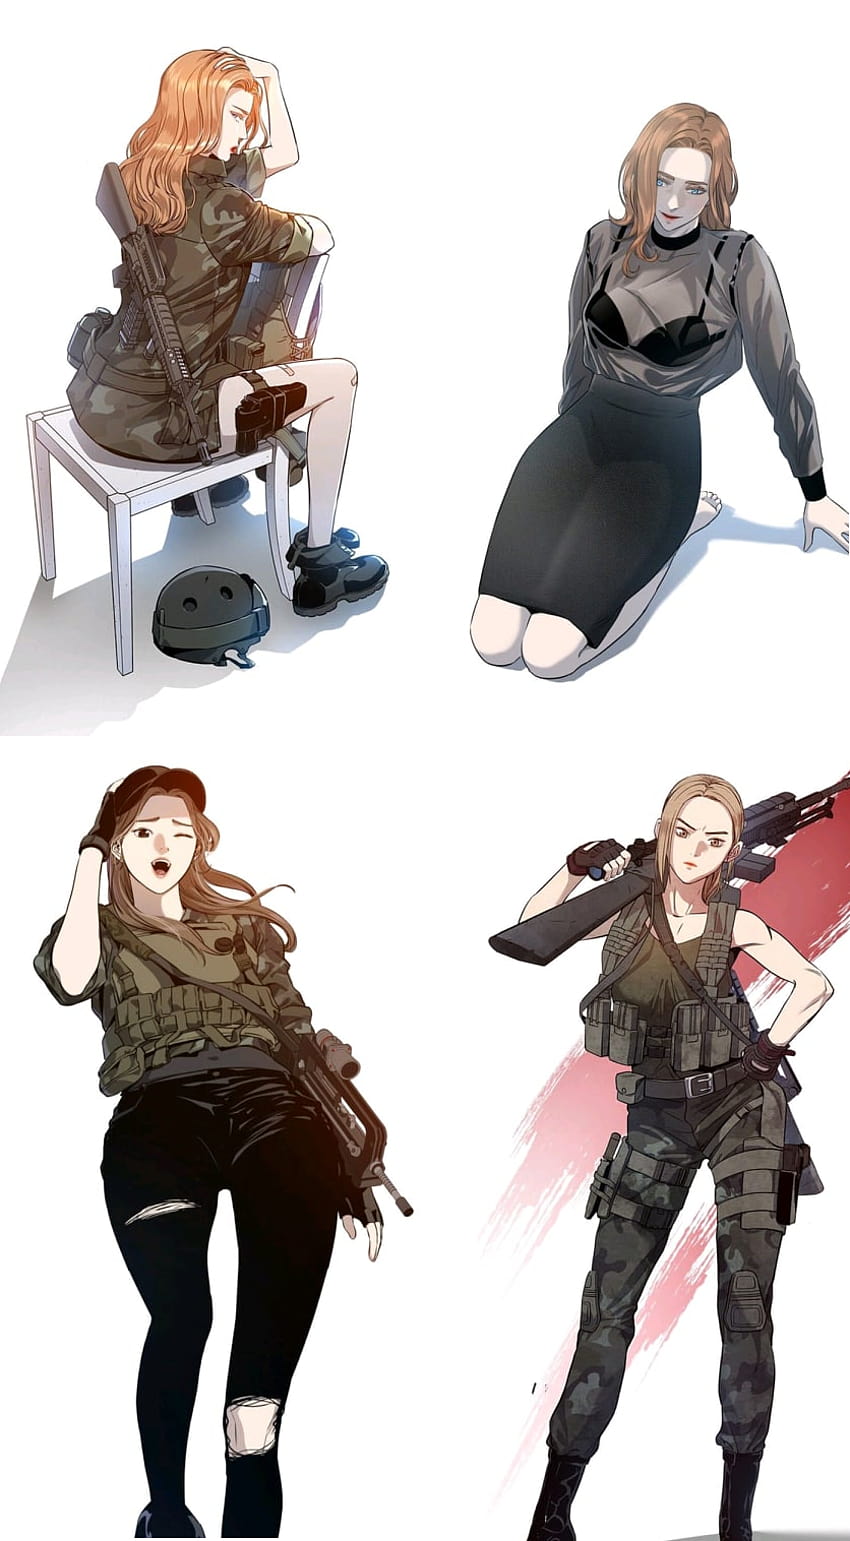 Art] These came from God of Blackfield but I feel like I already read something that draws women like this. Only God of Blackfield came out when I was searching for HD phone wallpaper